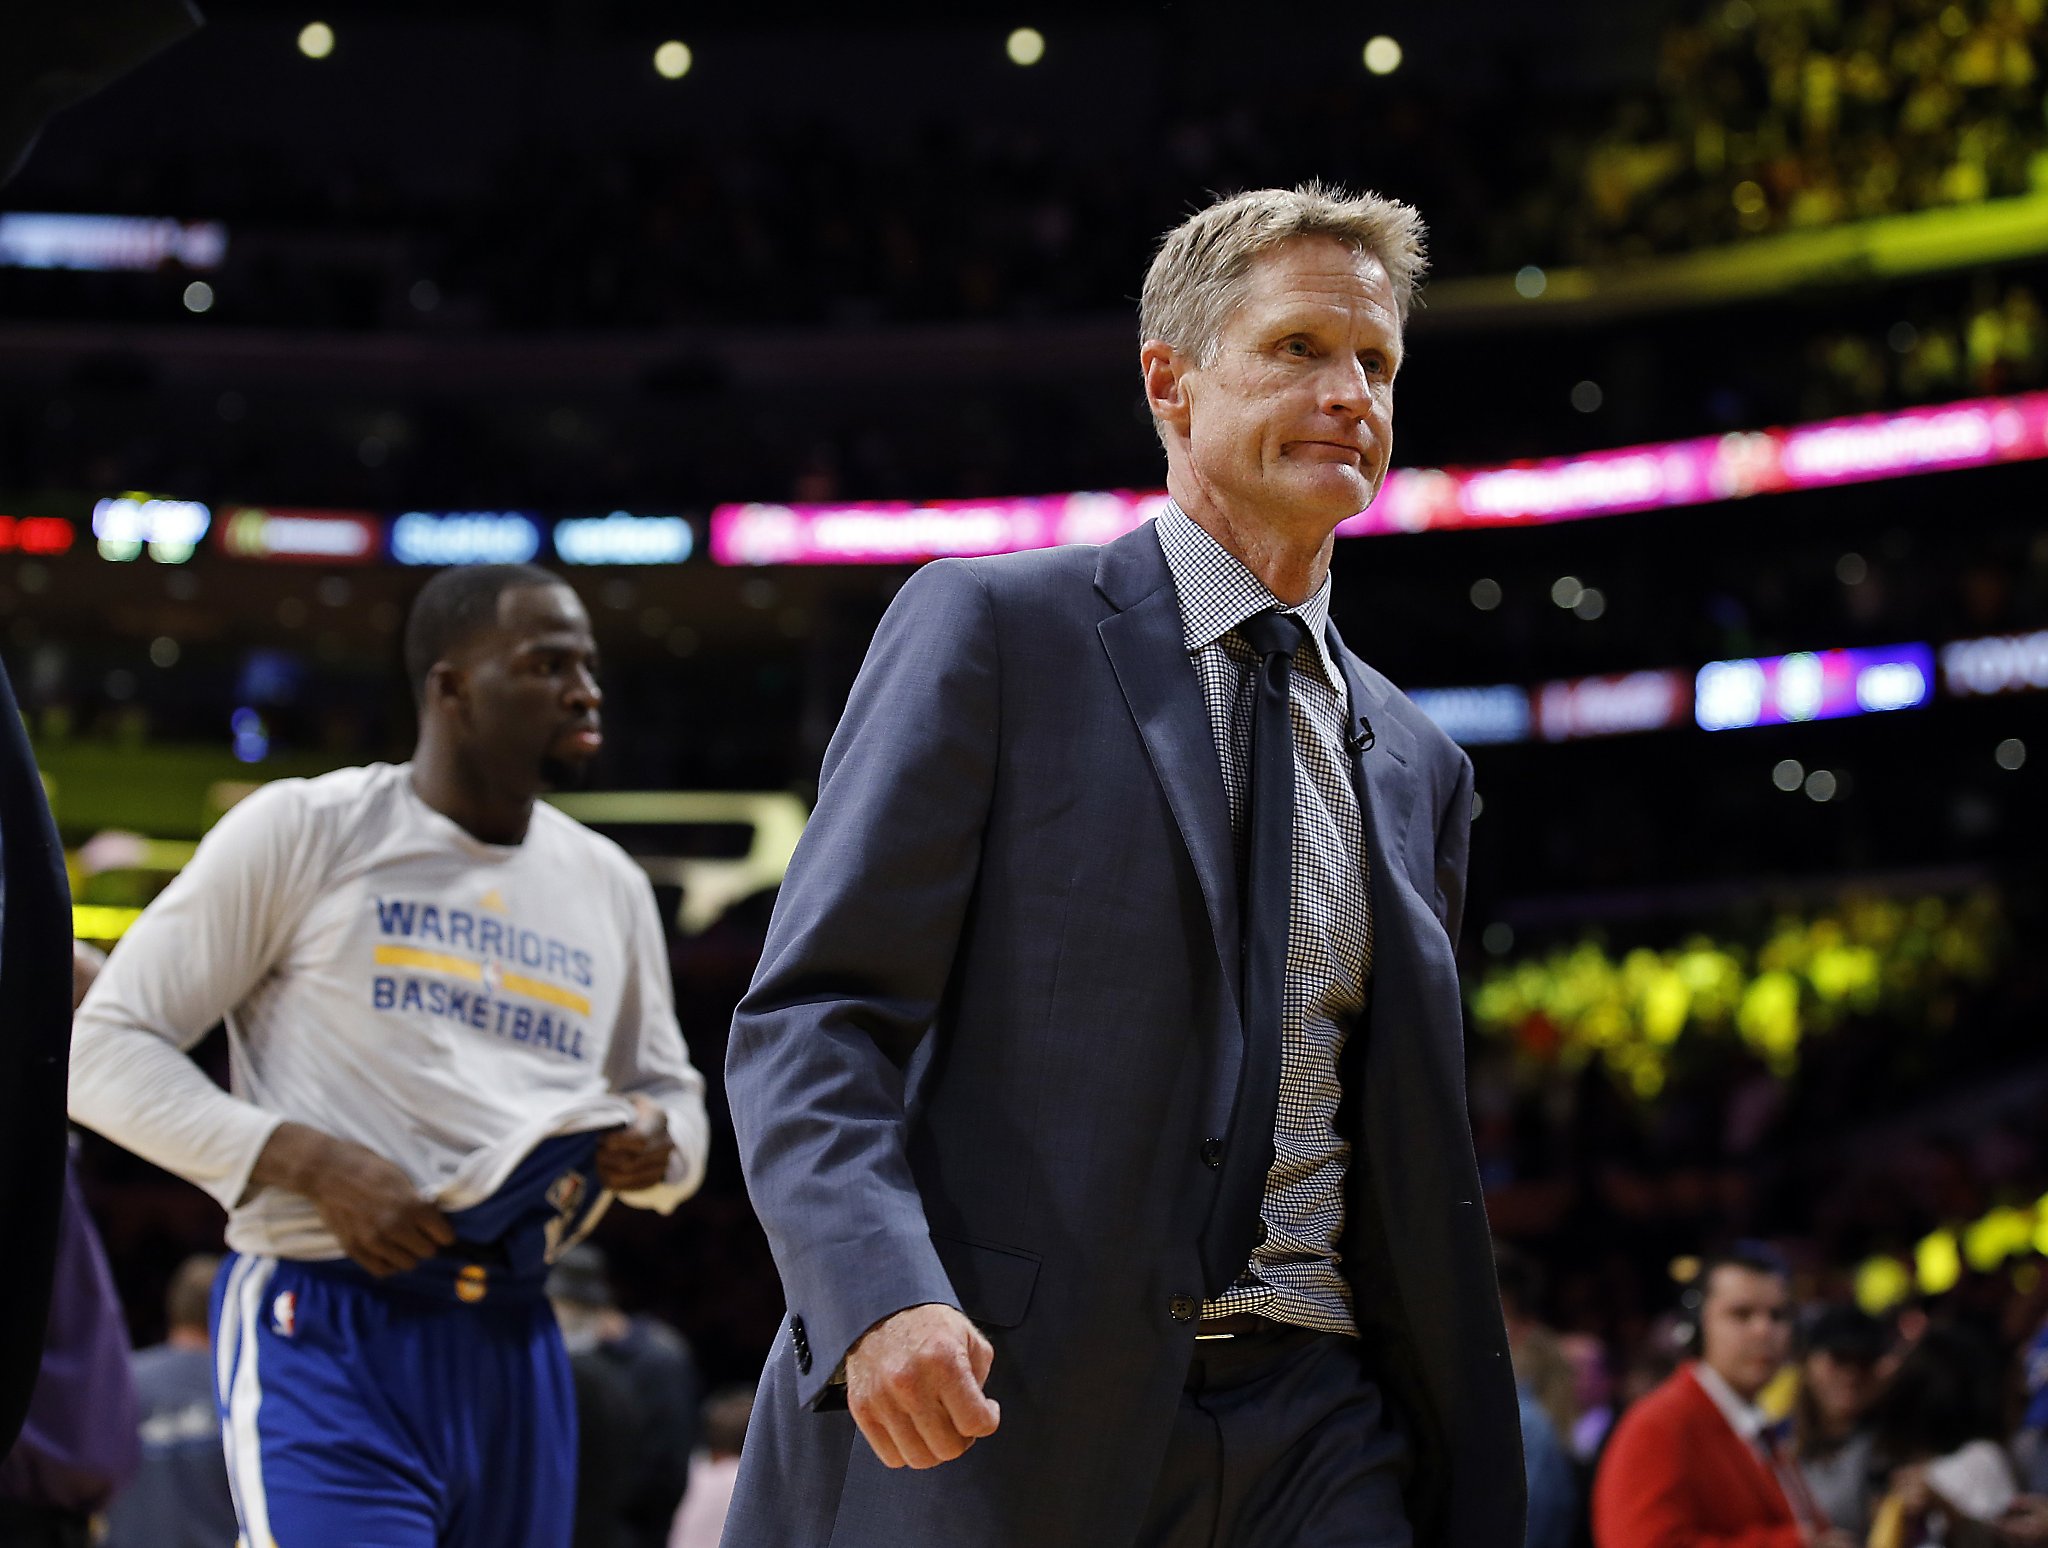 Kerr's career could be threatened by medical condition - San Francisco Chronicle